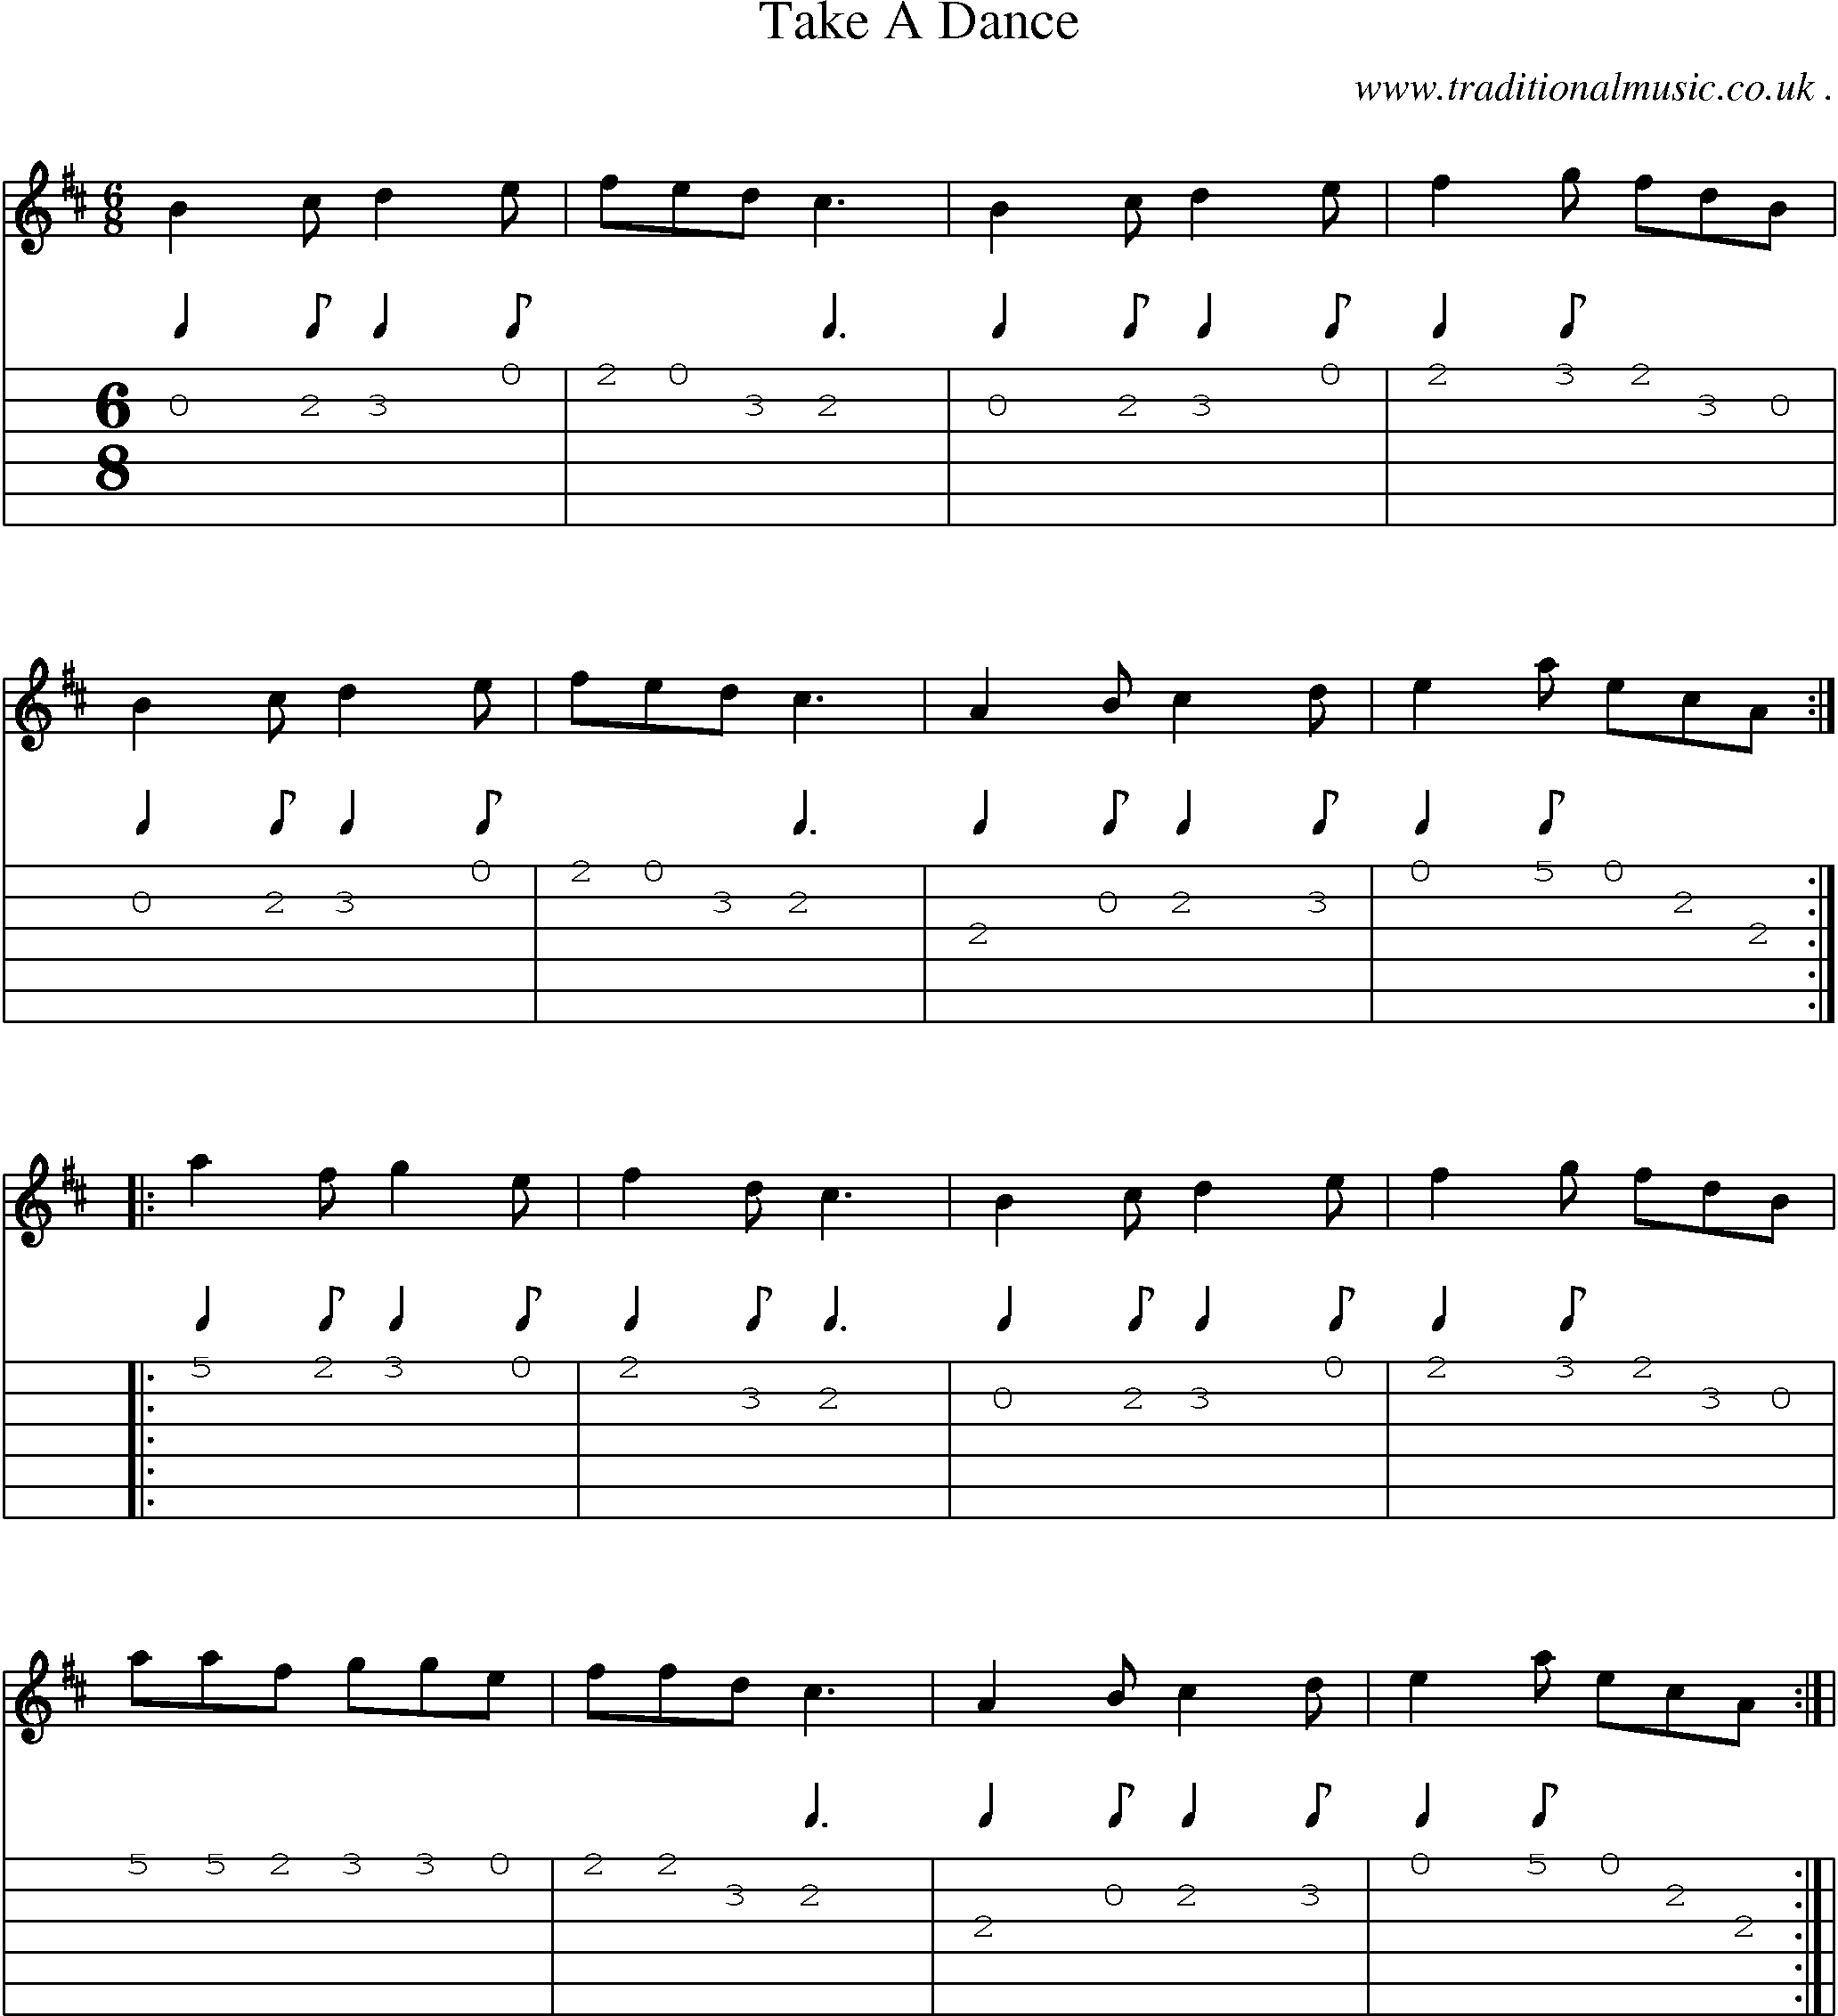 Sheet-Music and Guitar Tabs for Take A Dance